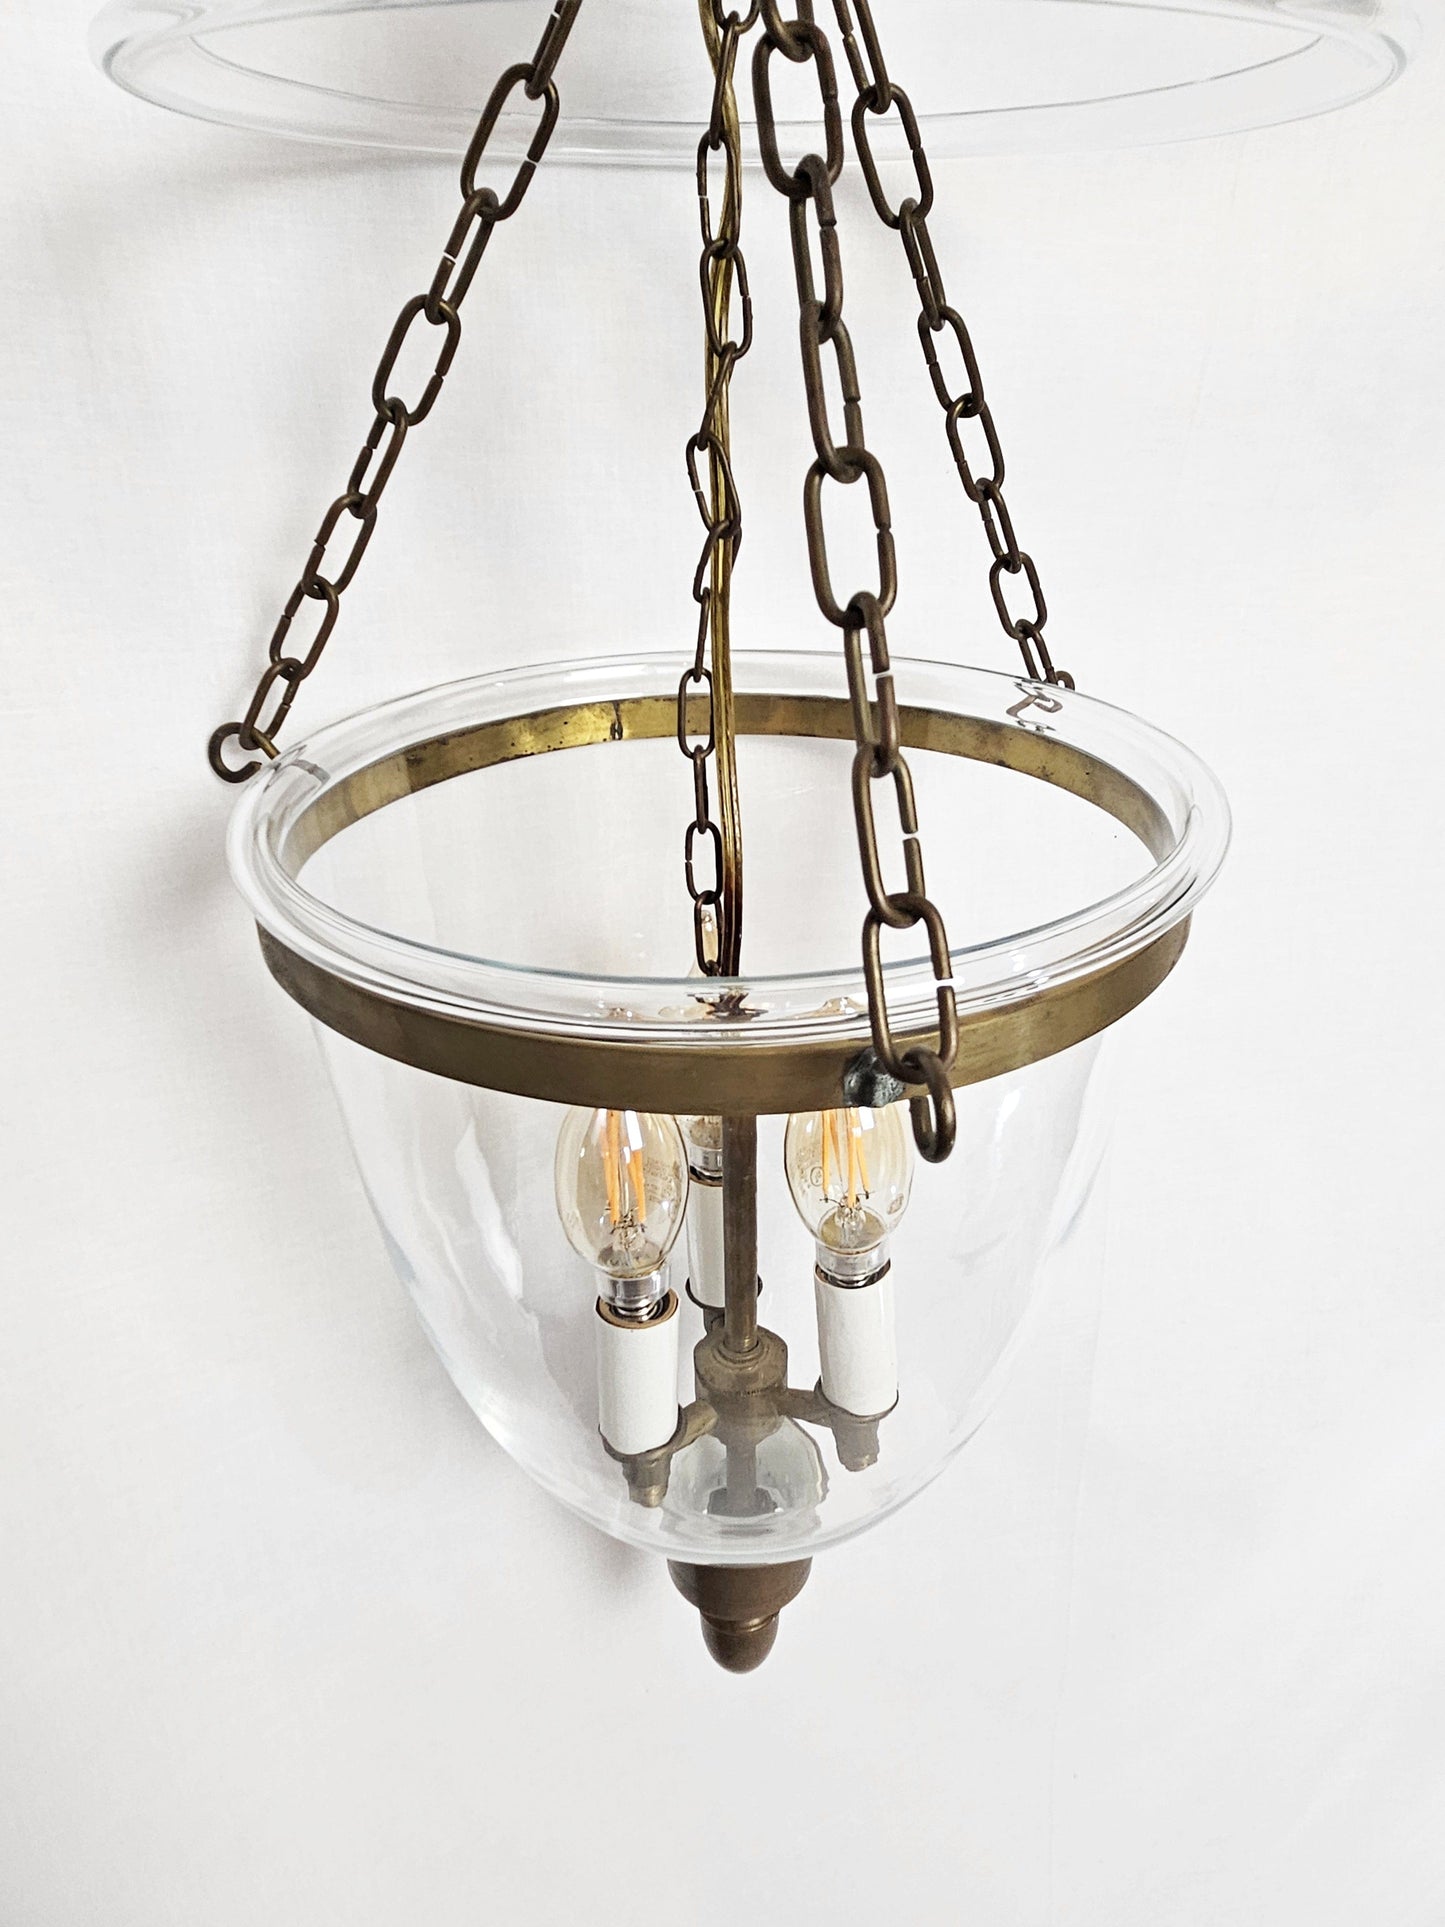 MCM Lamp Lighting MCM Cloche Glass and Brass Hanging Bell Jar Style Light